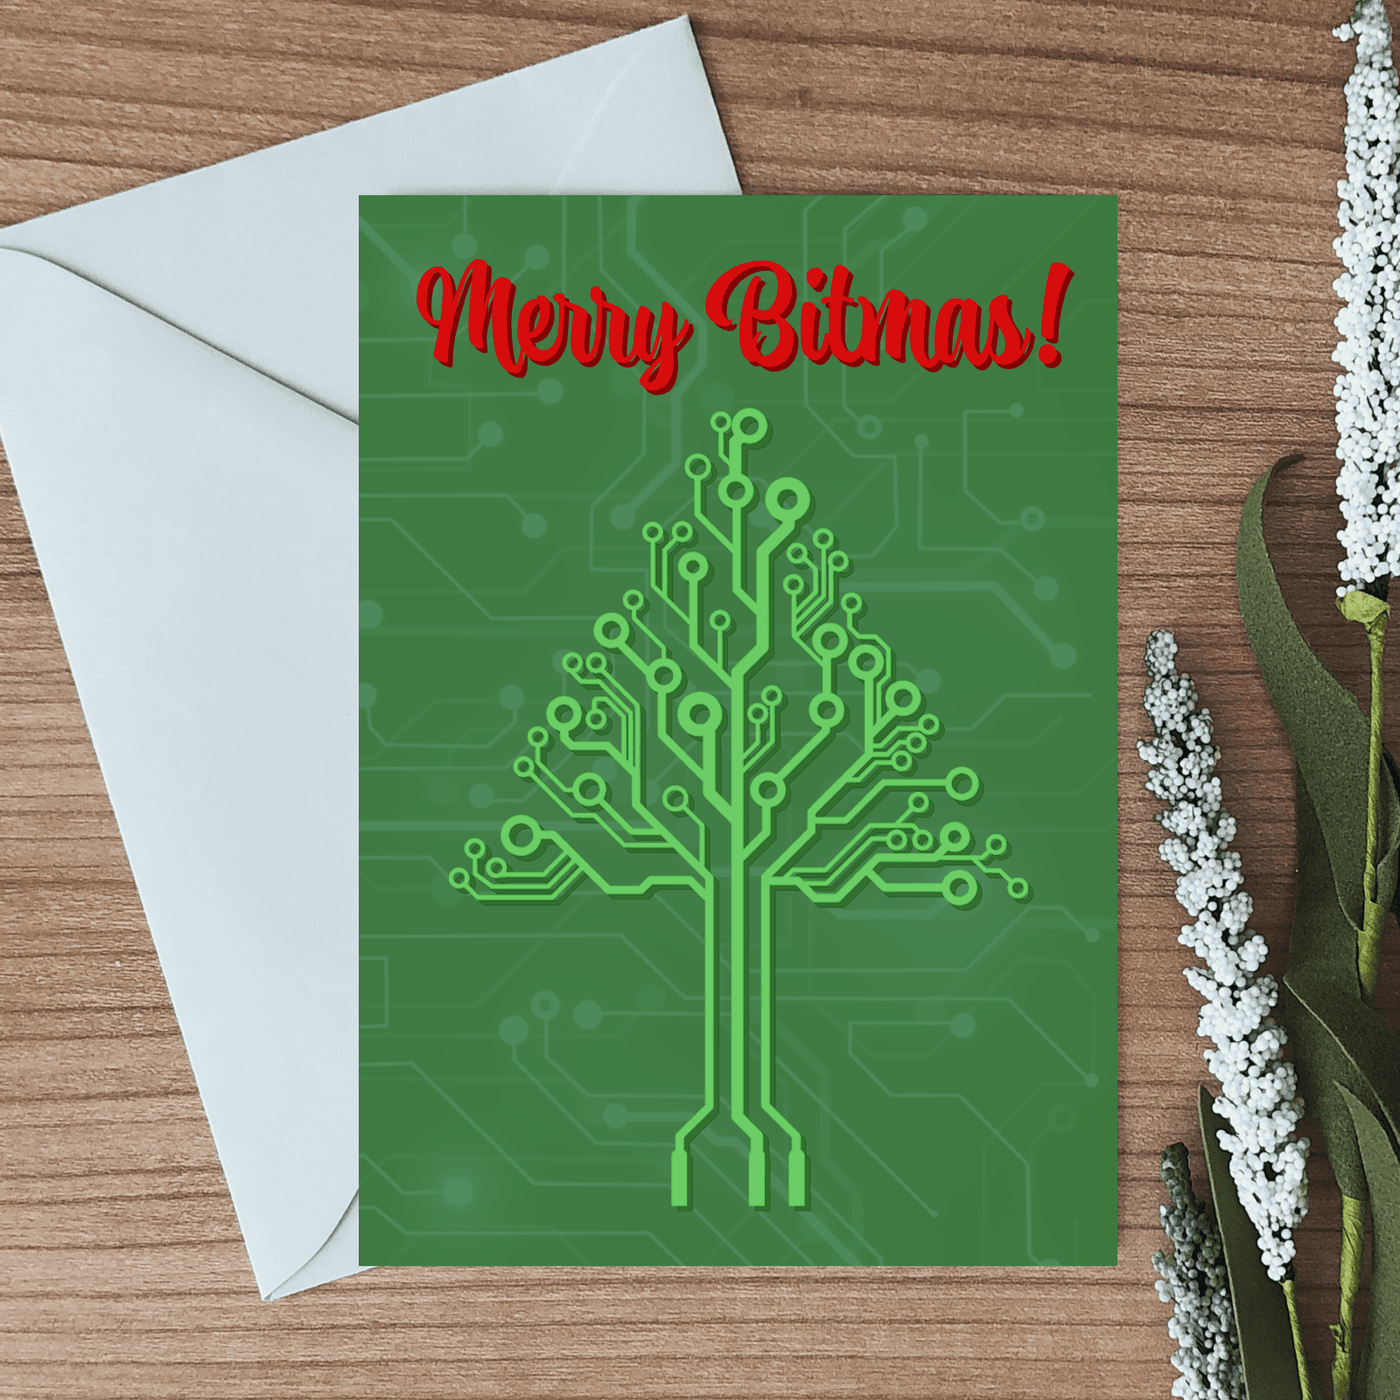 blank inside greeting card with a picture of a holiday tree made from circuitry